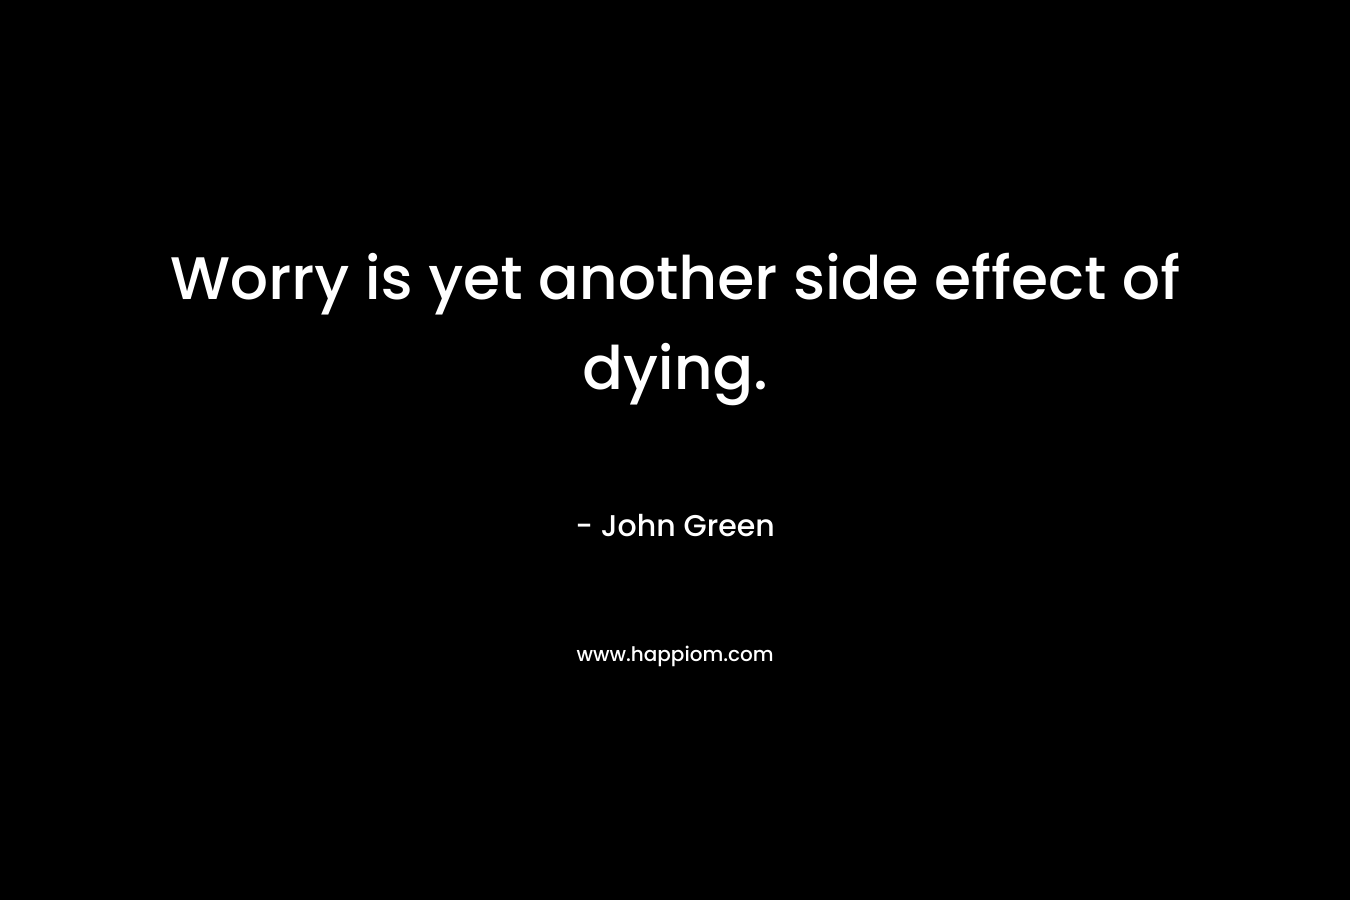 Worry is yet another side effect of dying. – John Green